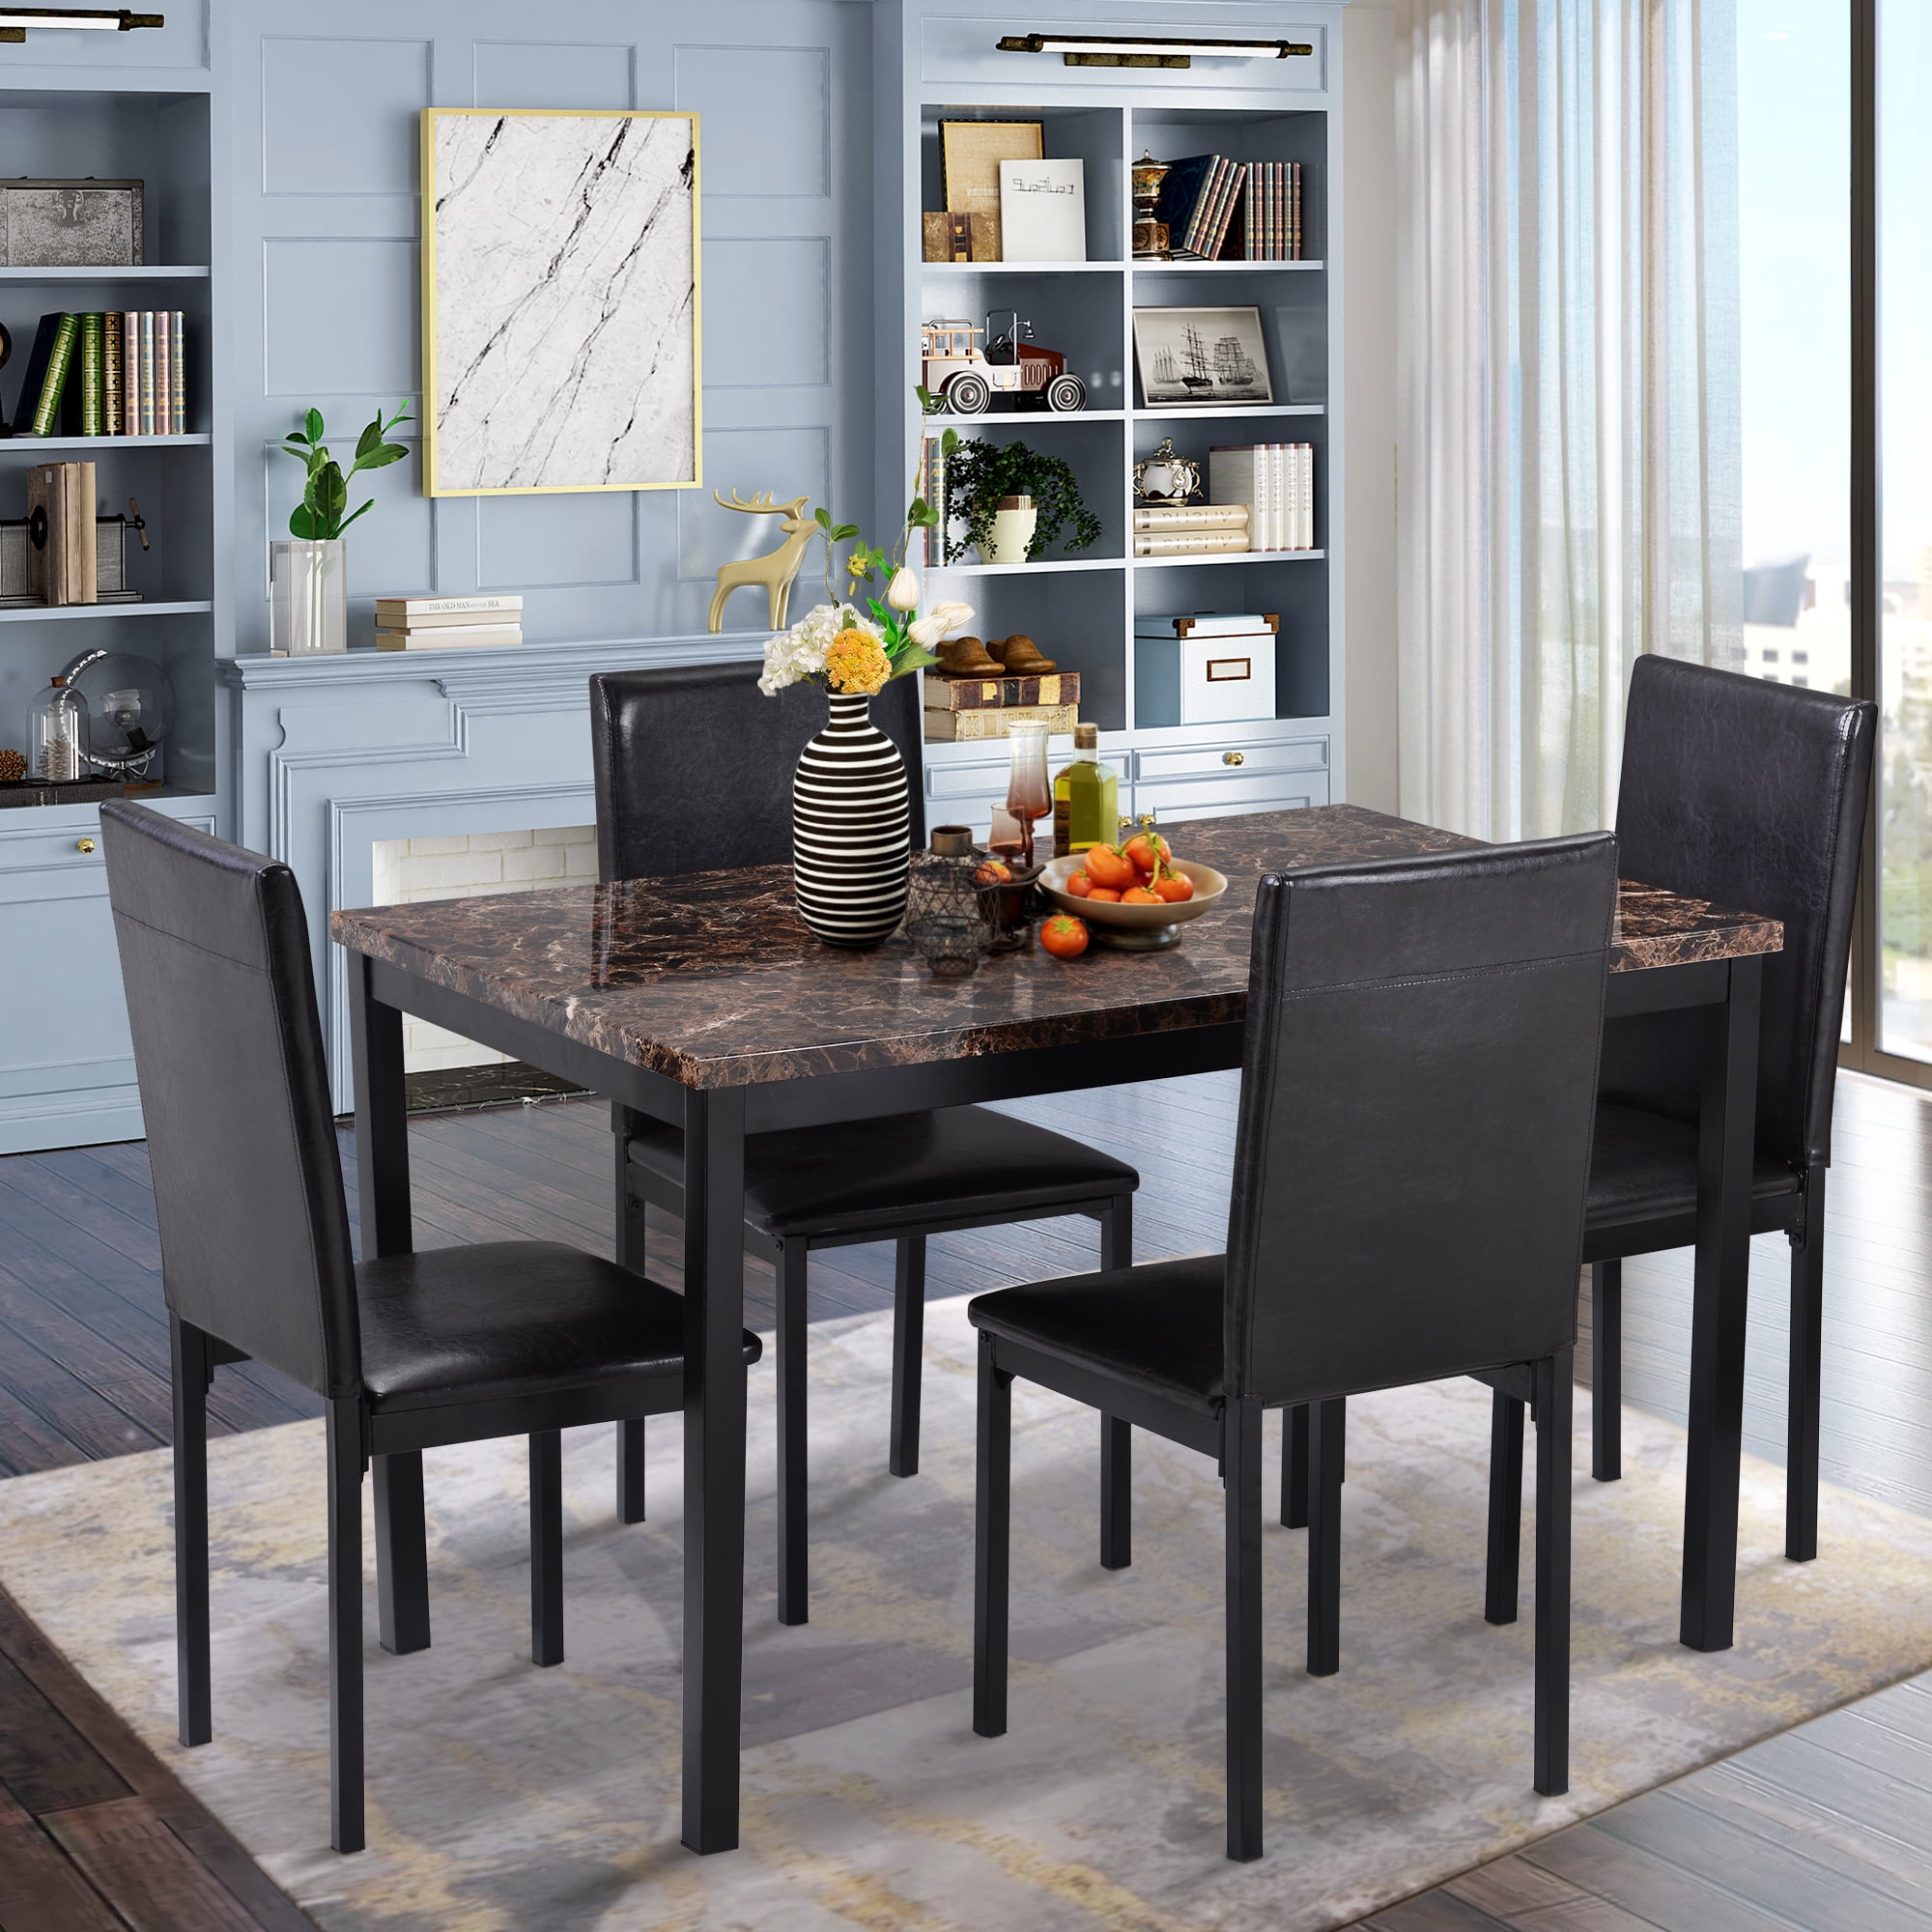 5pcs Dining Set Kitchen Table Set Dining Table And 4 Leather Chairs Walmartcom Walmartcom